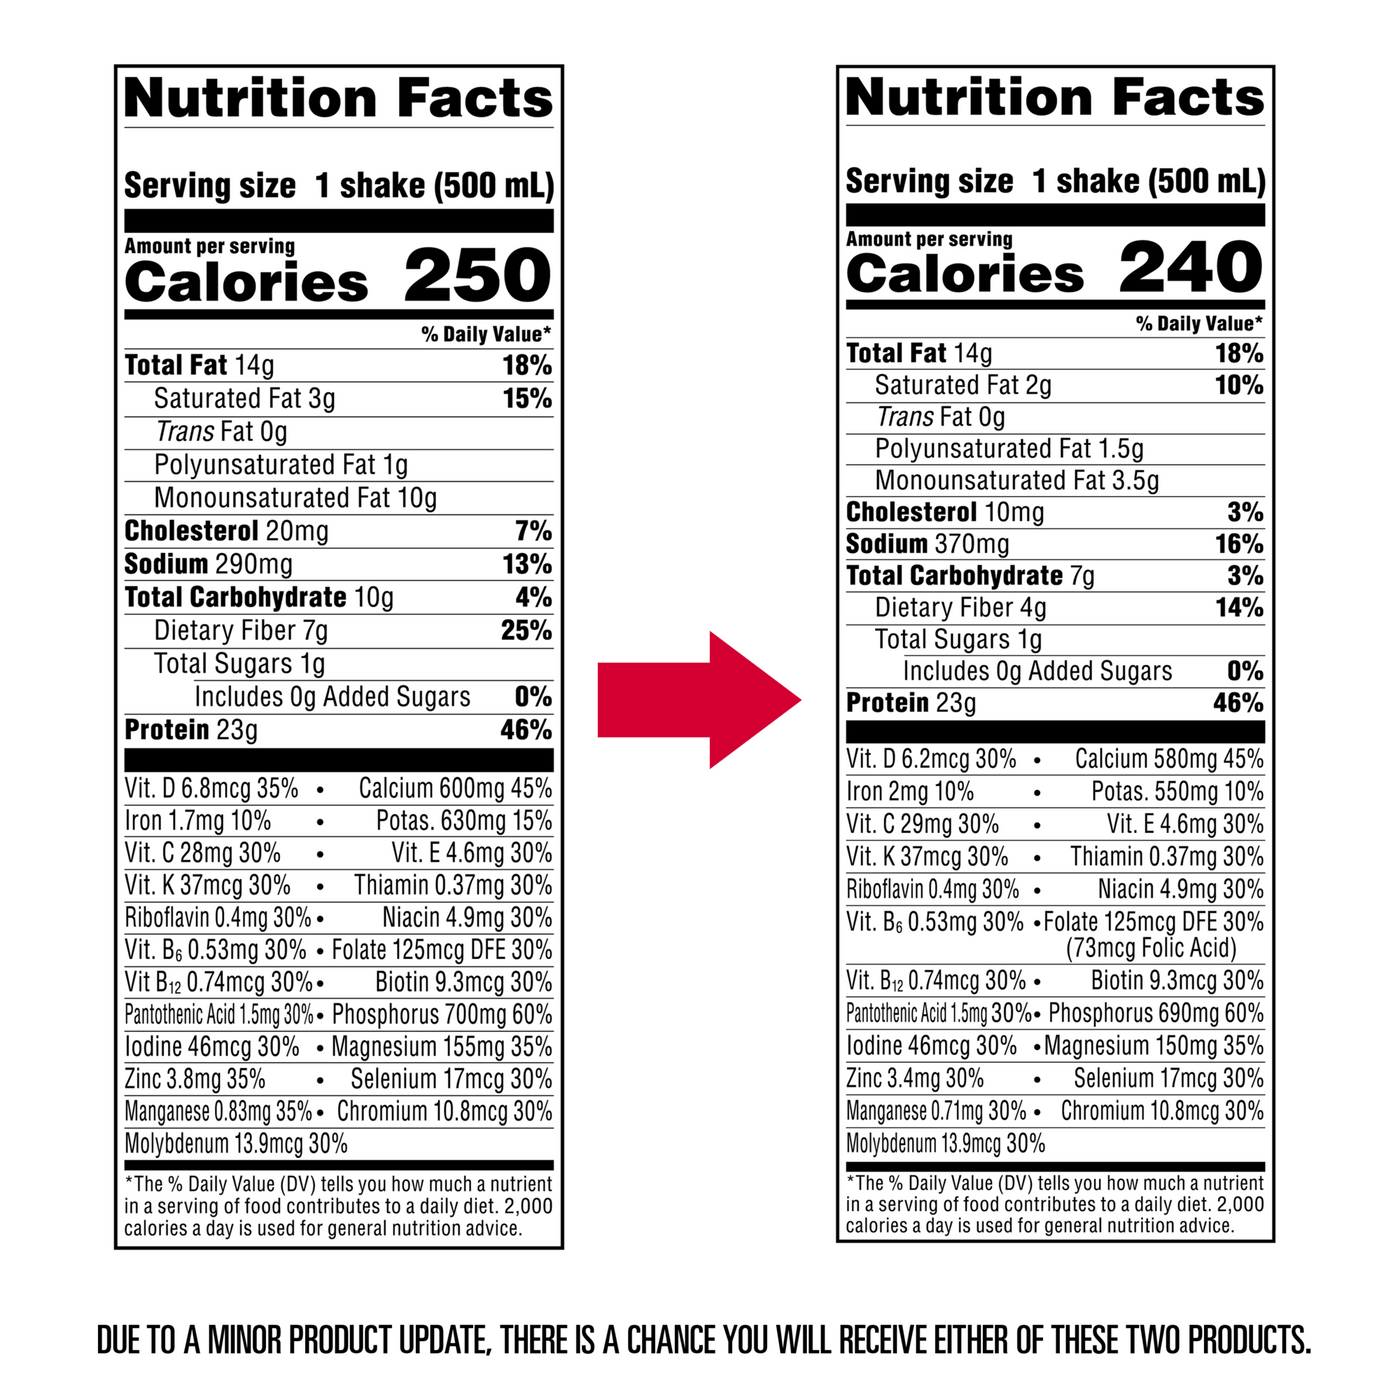 Vanilla Cream Shake - Nutrition Facts outdated vs updated